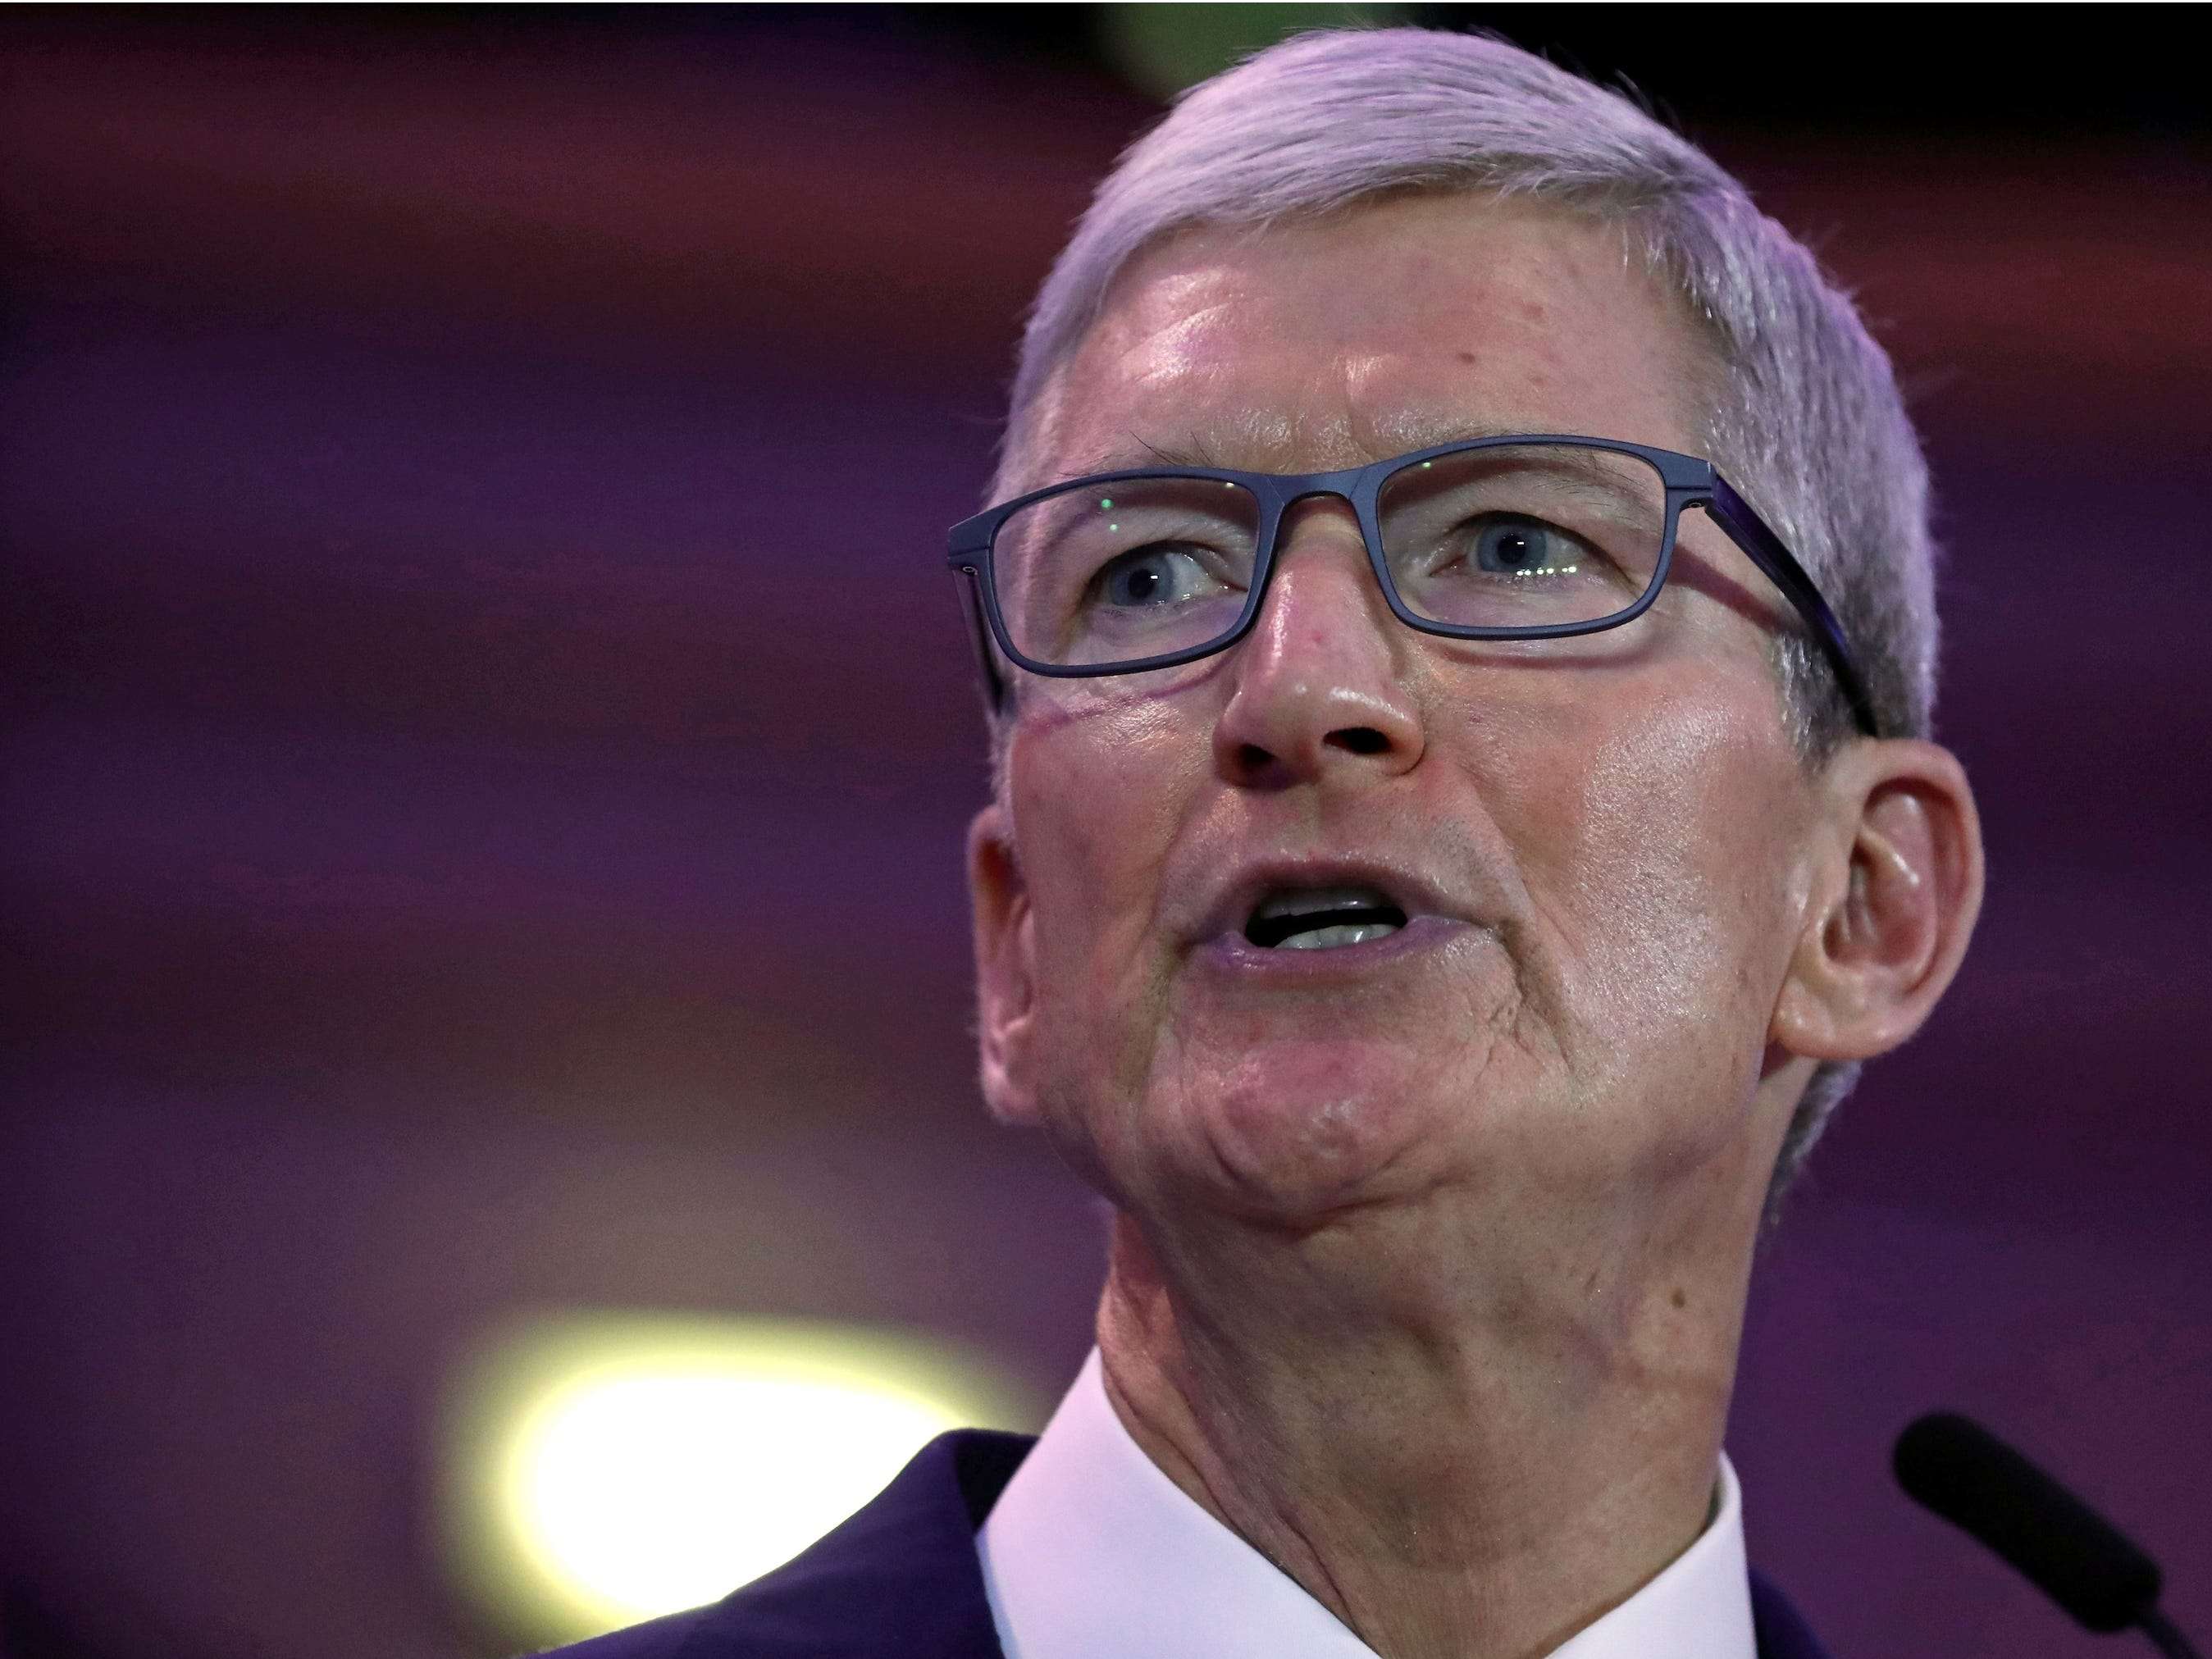 LIVE Here come Apple's fiscal 2ndquarter earnings Business Insider